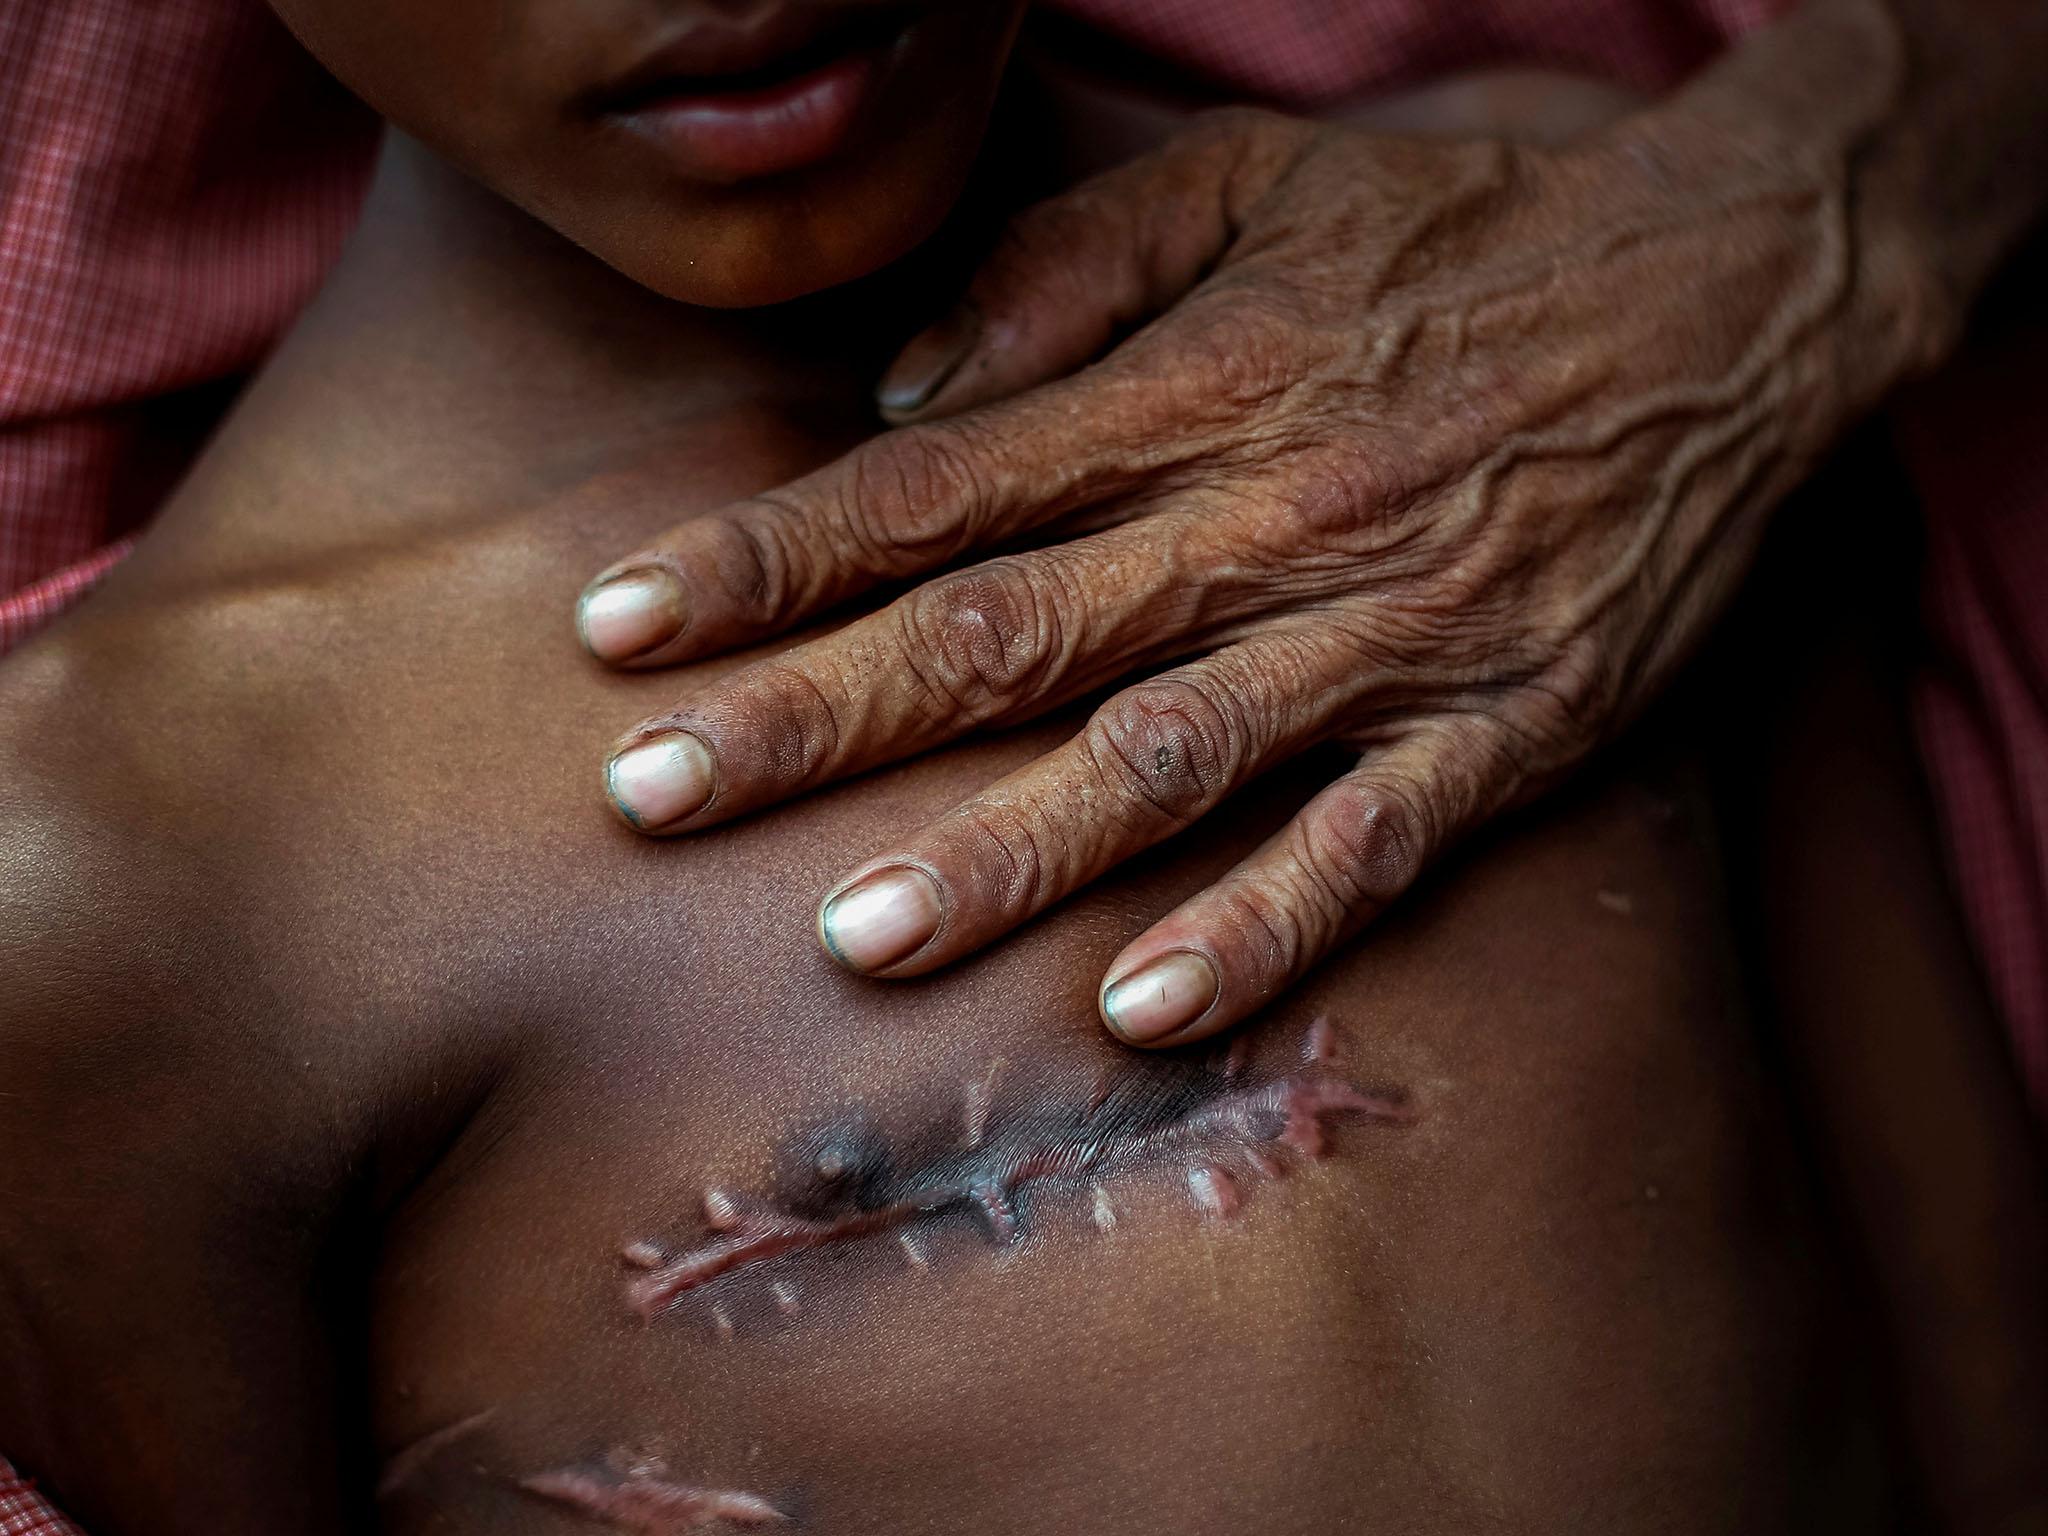 Mohammed Shoaib, 7, was shot in his chest before crossing the border from Myanmar (Reuters)